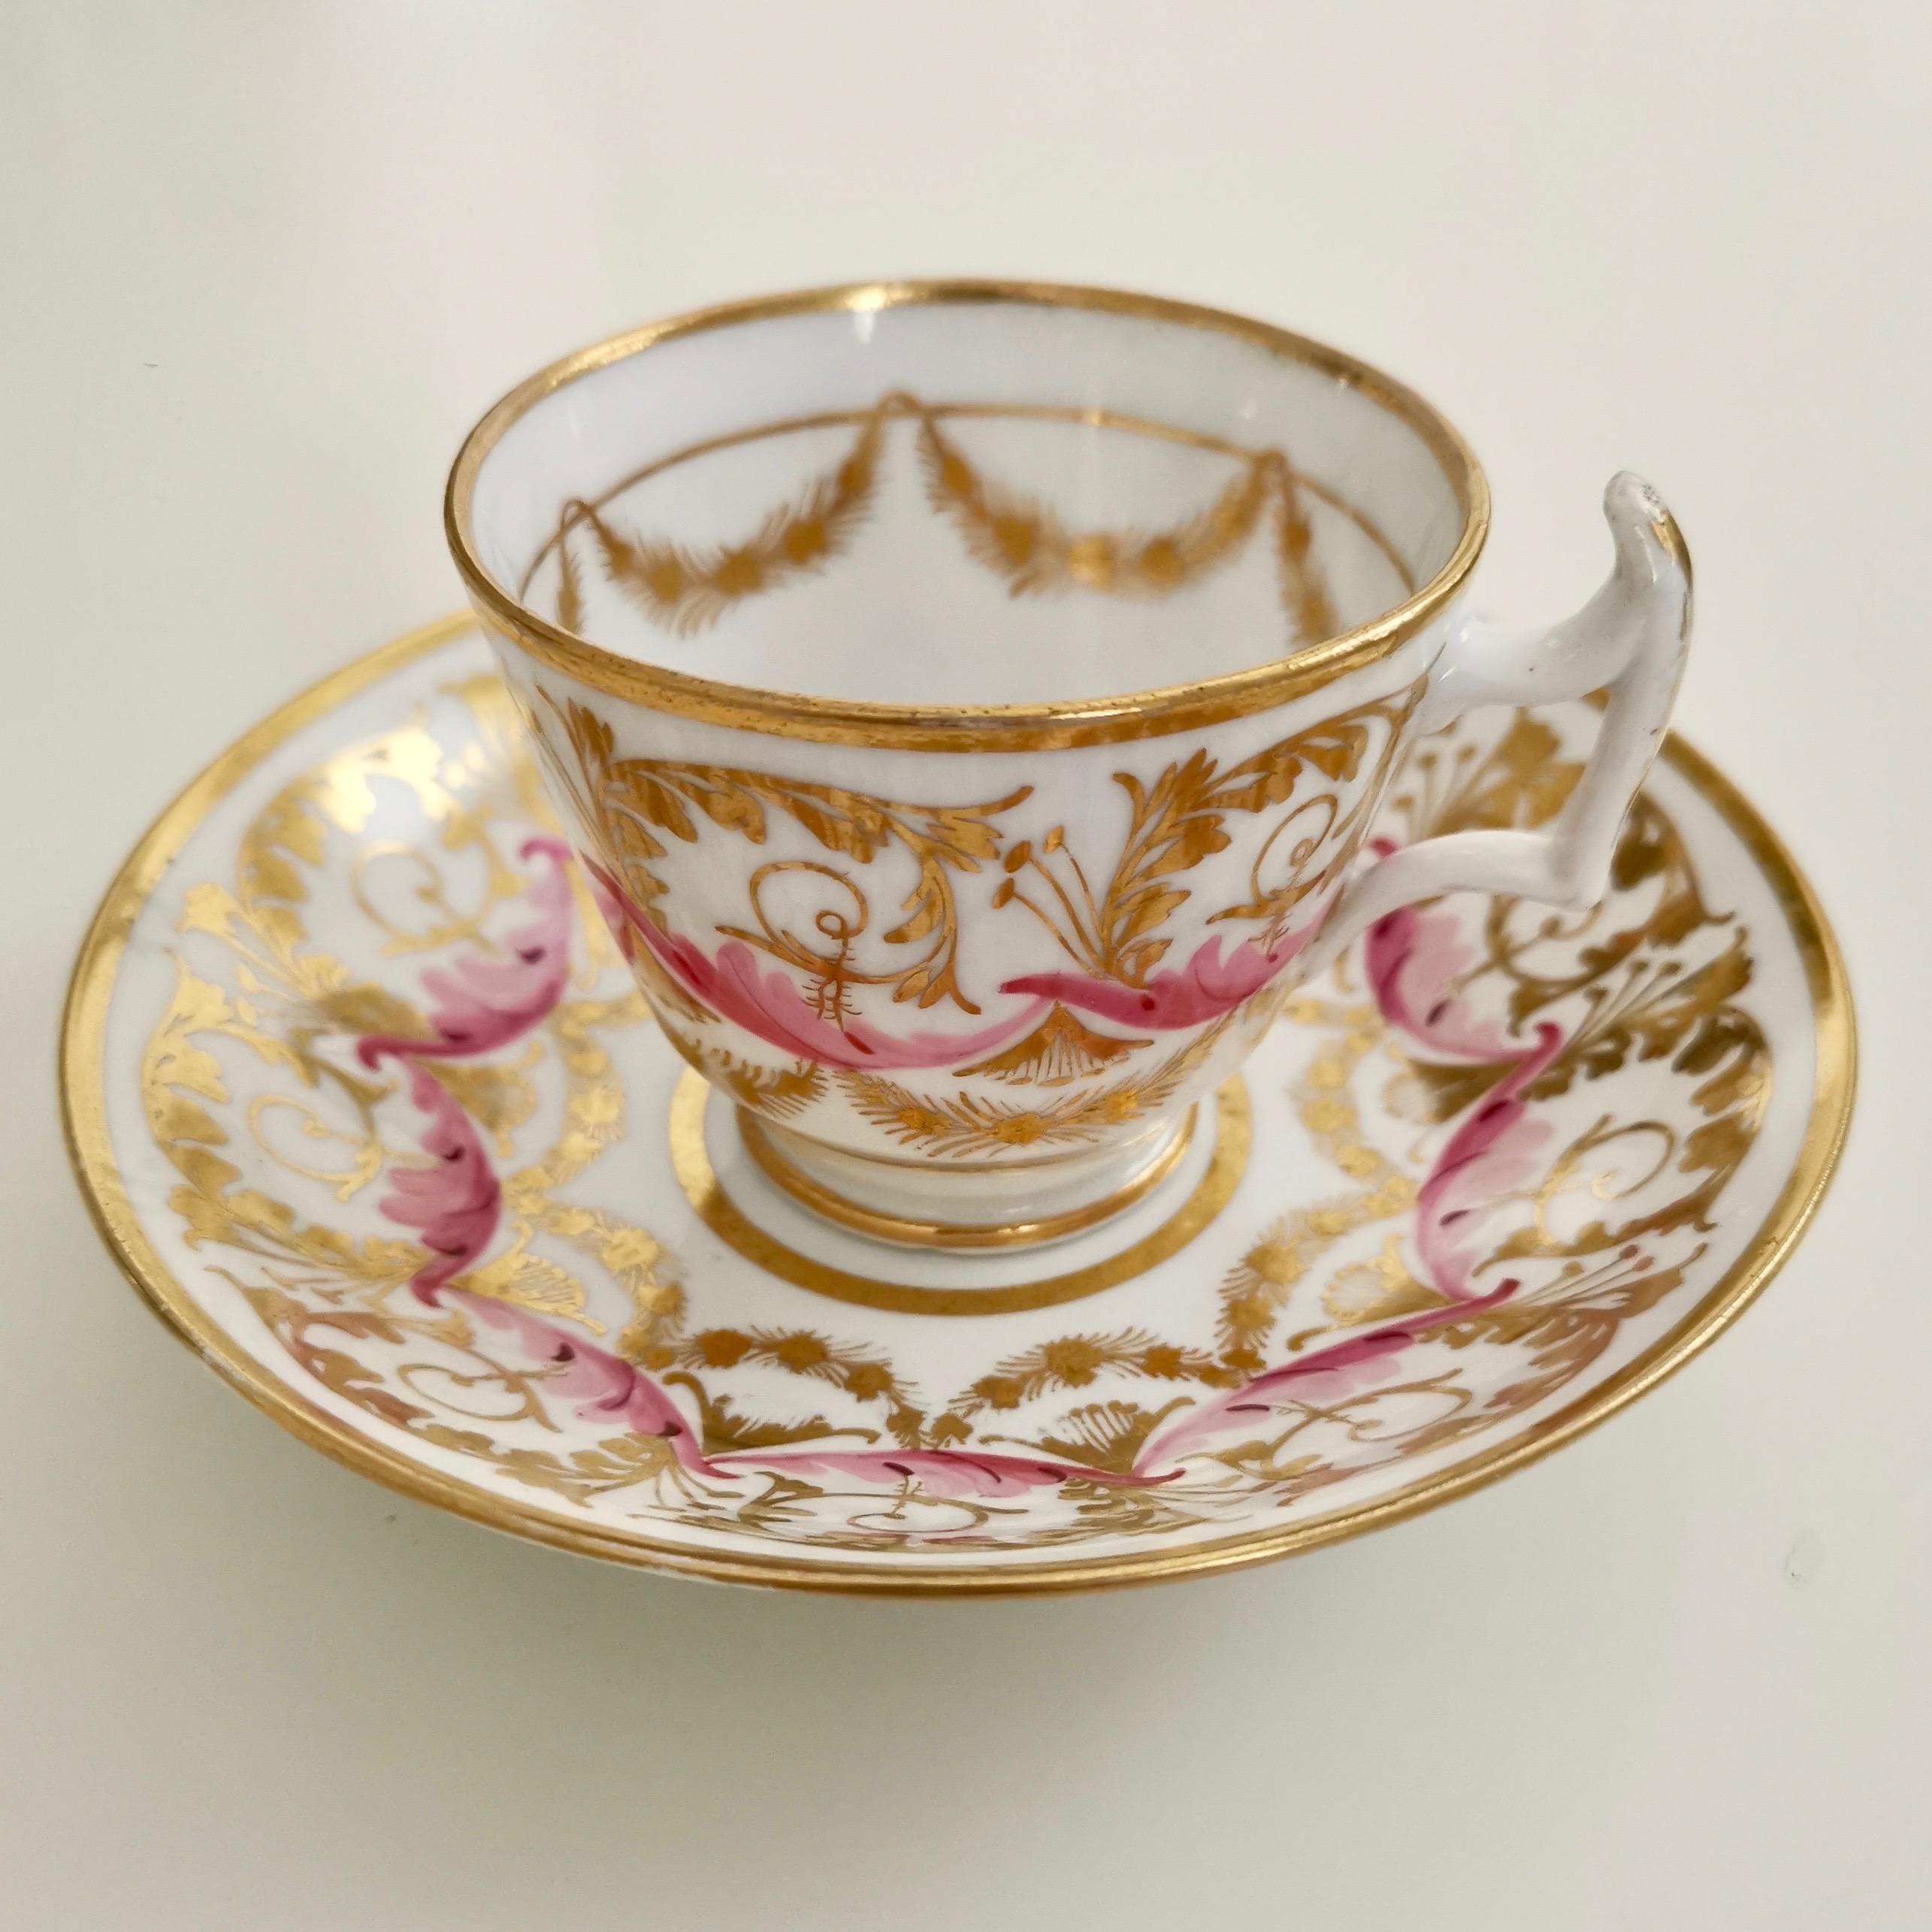 English New Hall Cup and Saucer, Gilt and Pink Sprigs, Regency, 1815-1820